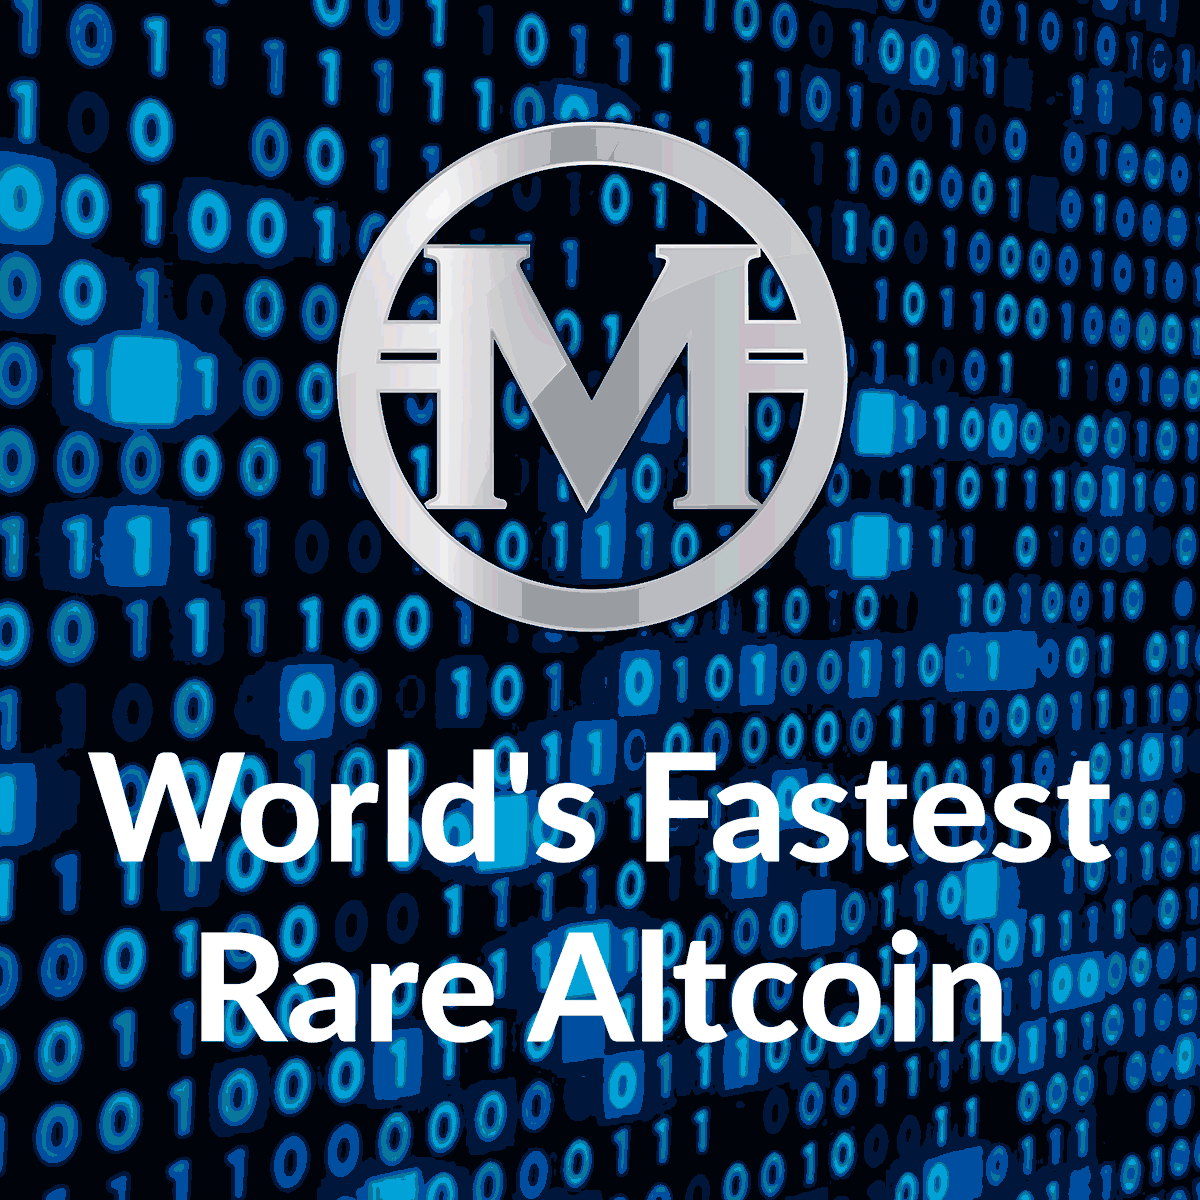 Building Wealth With Rare Altcoin Investing | Rare Altcoin